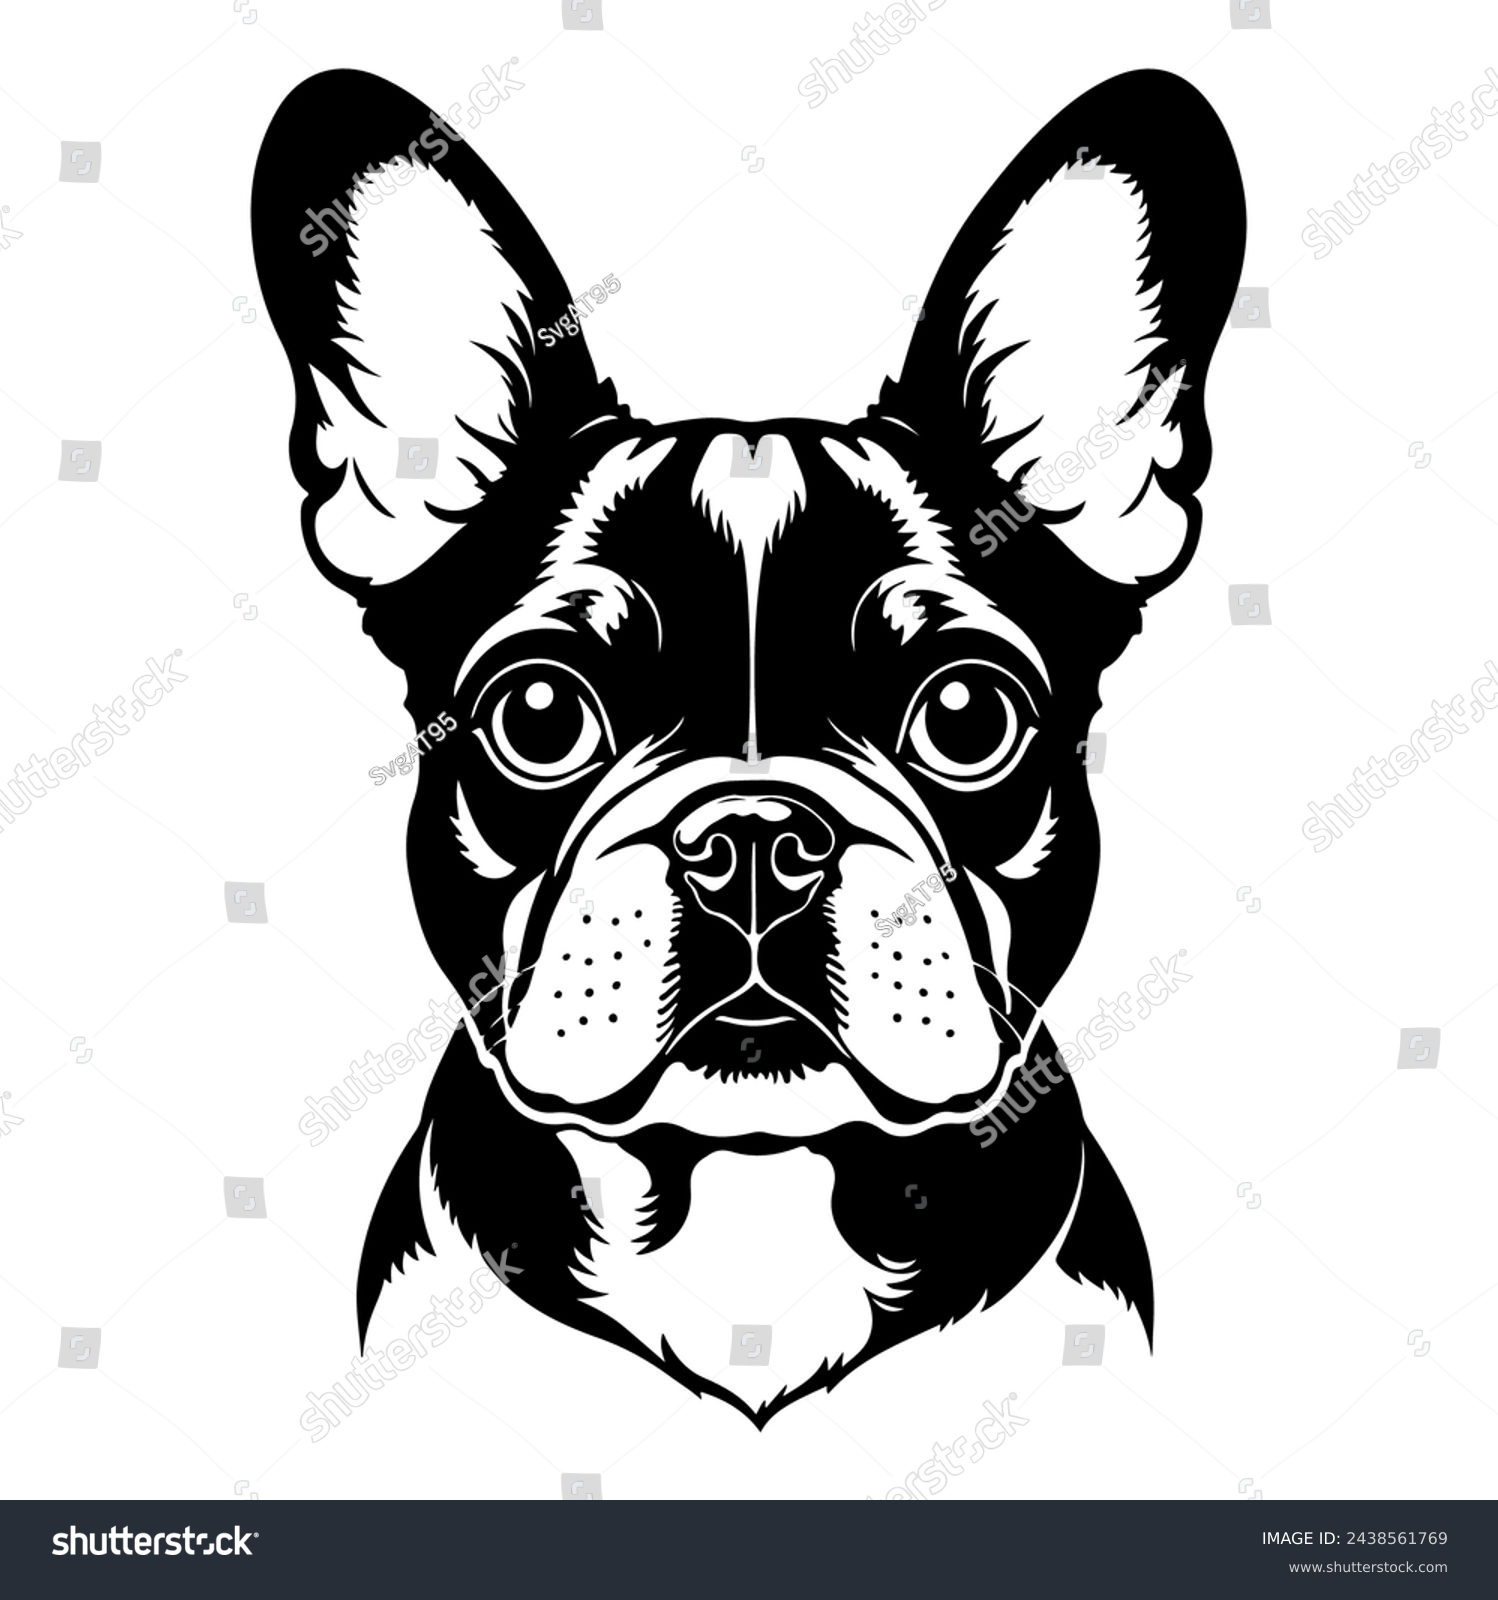 SVG of Portrait of a French Bulldog Dog Vector isolated on white background, Dog Silhouettes. svg